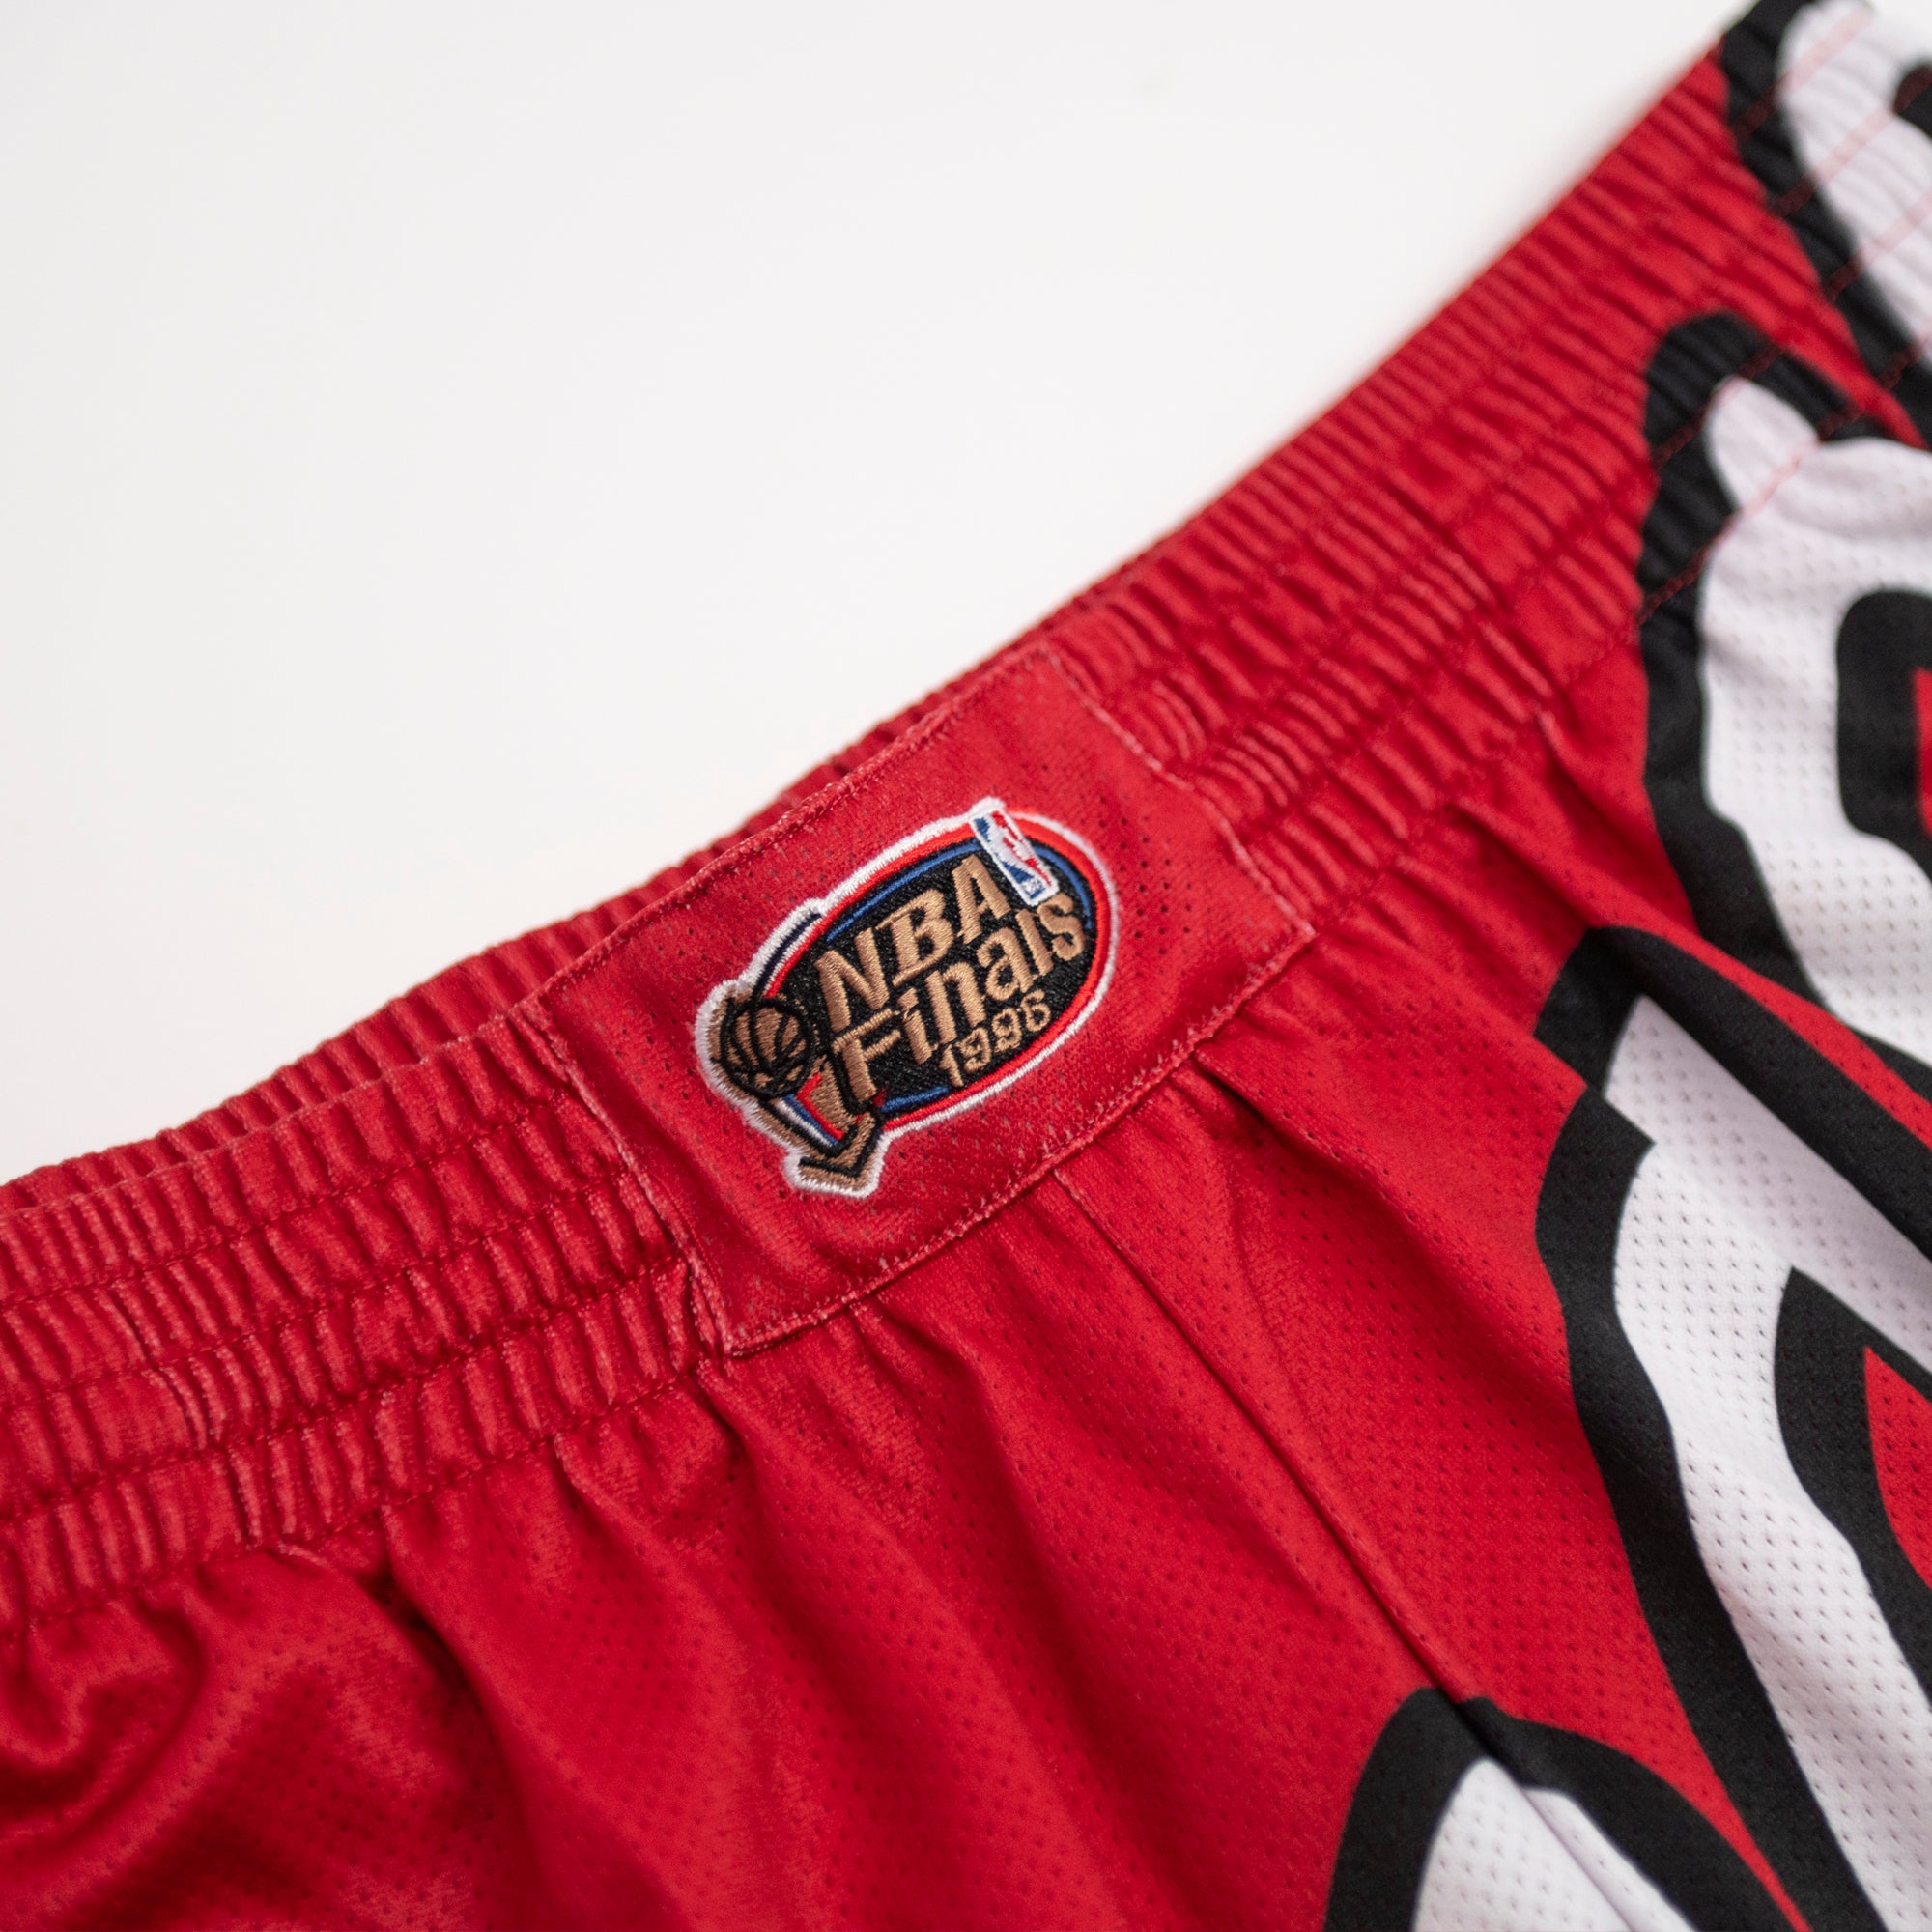 Mitchell & Ness - Men's Big Face 2.0 Shorts Miami Heat - Red